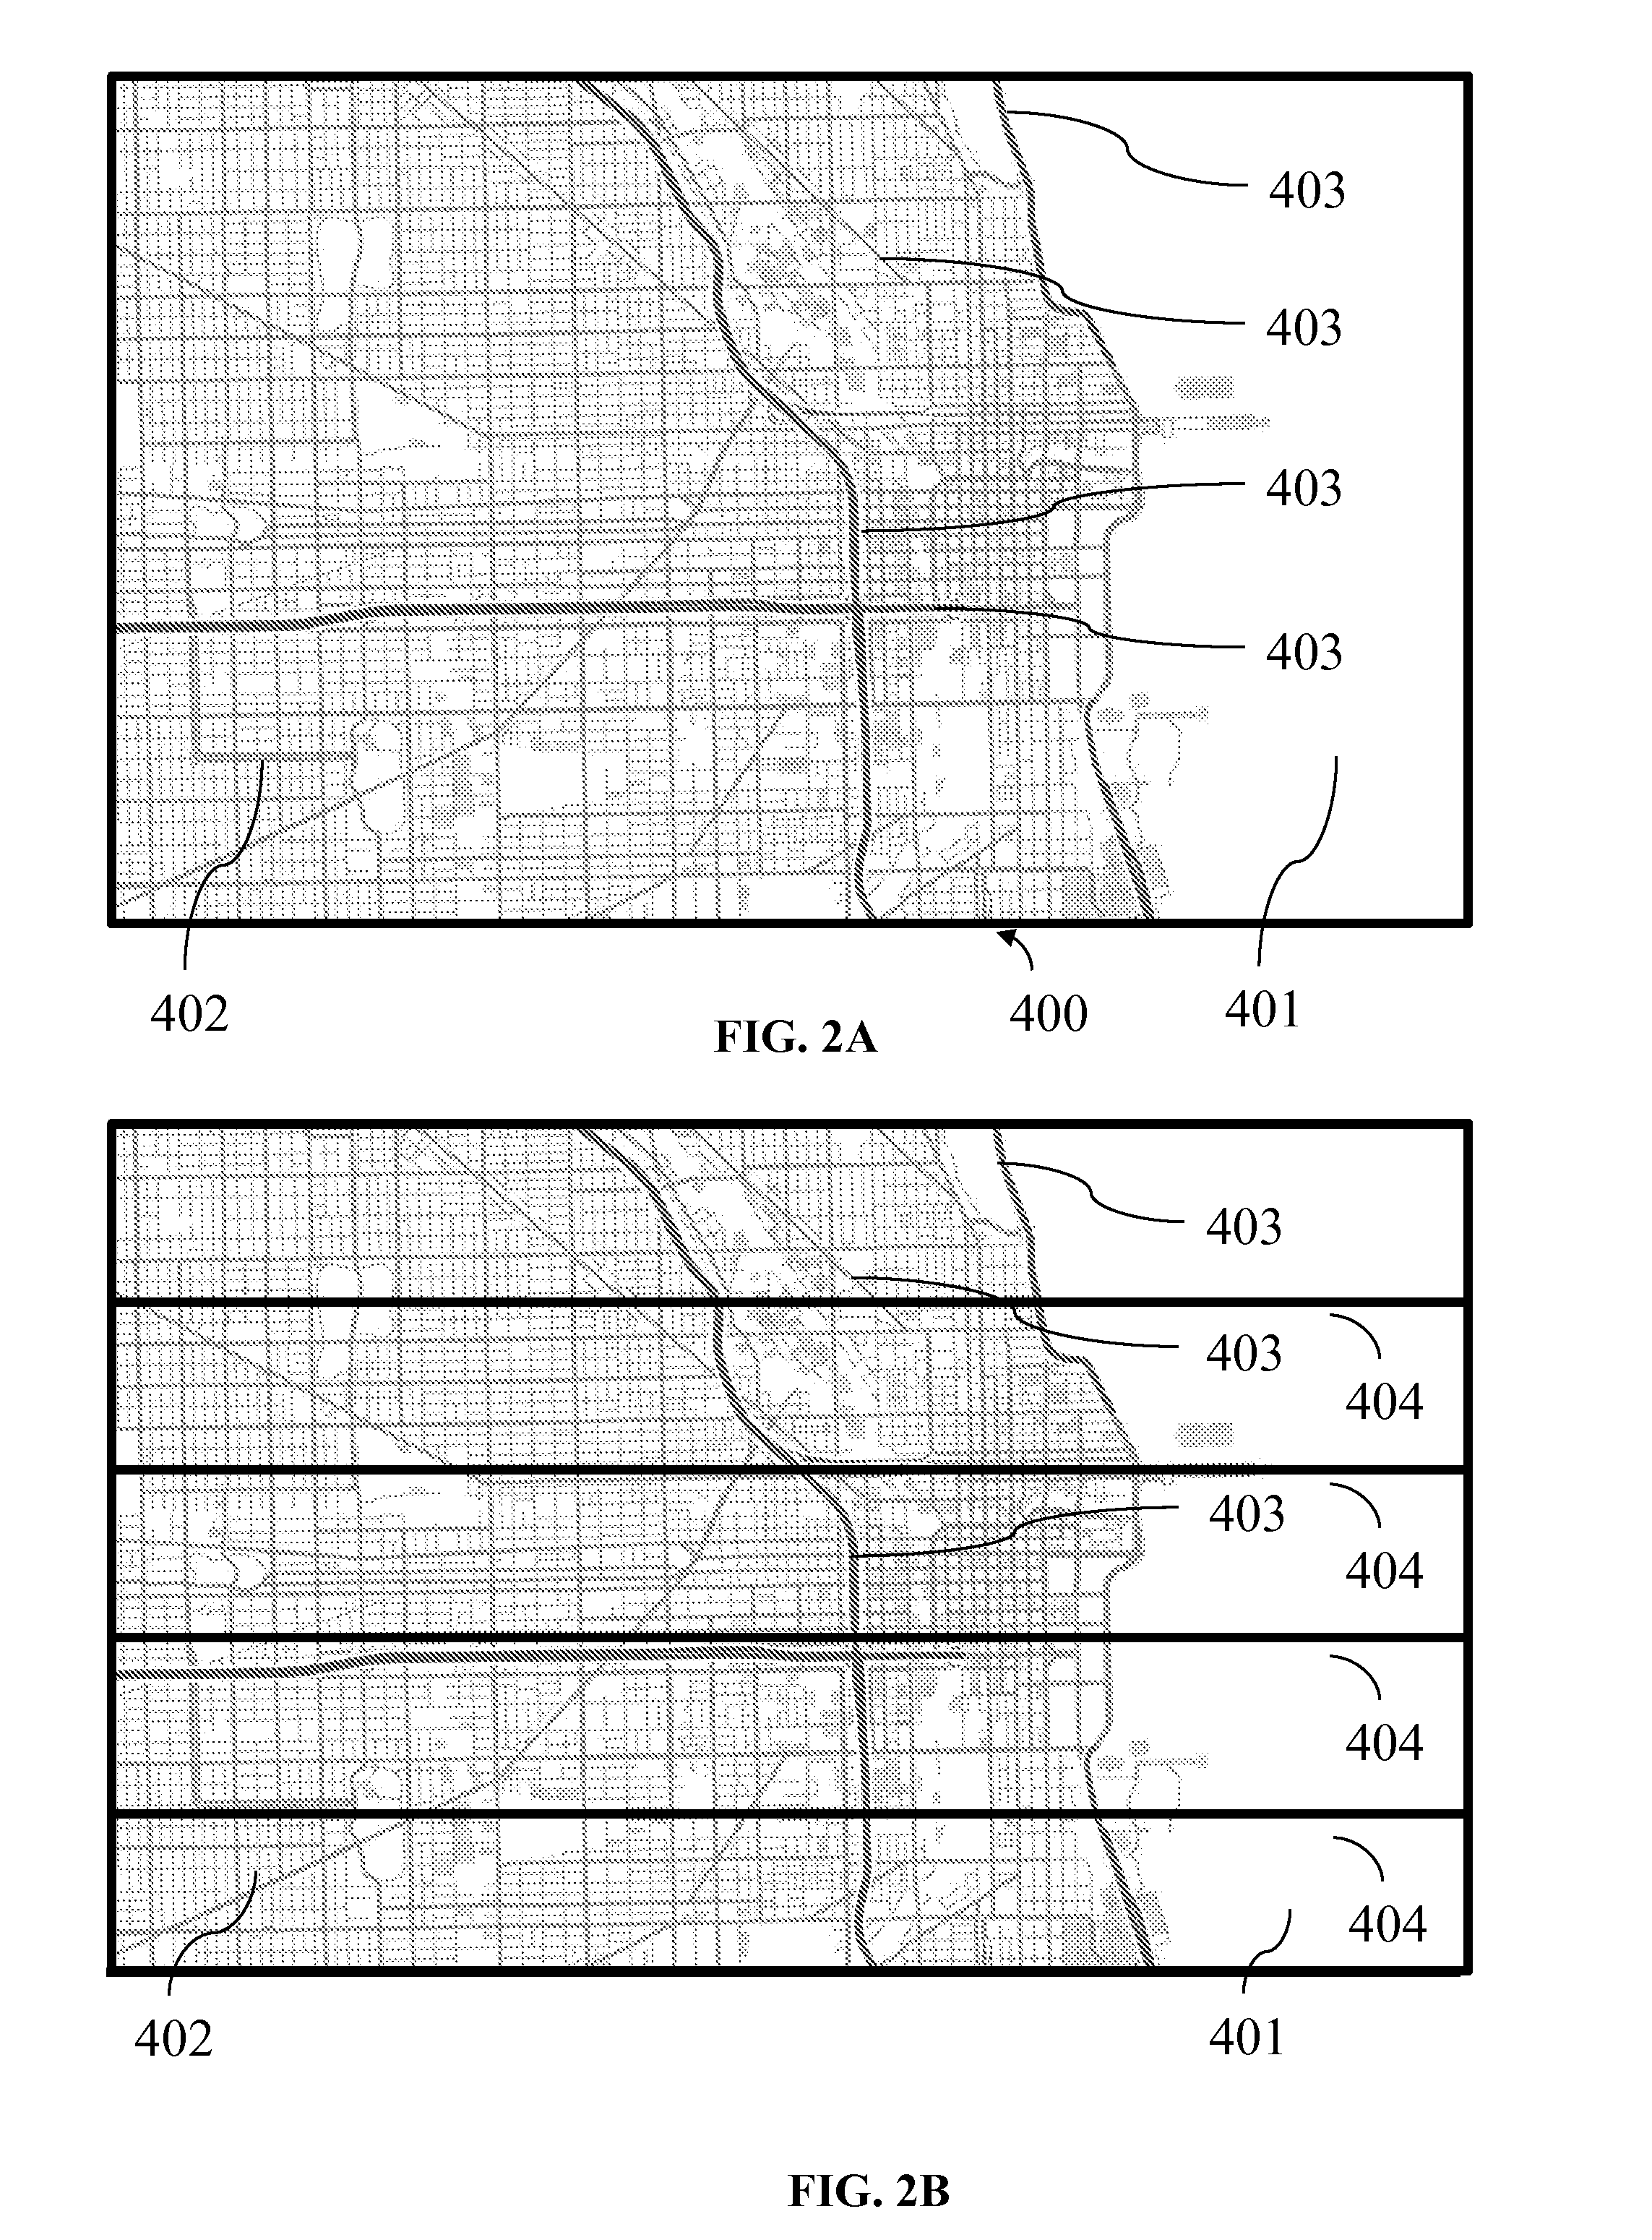 Method and system for implementing navigation using bounded geograhic regions